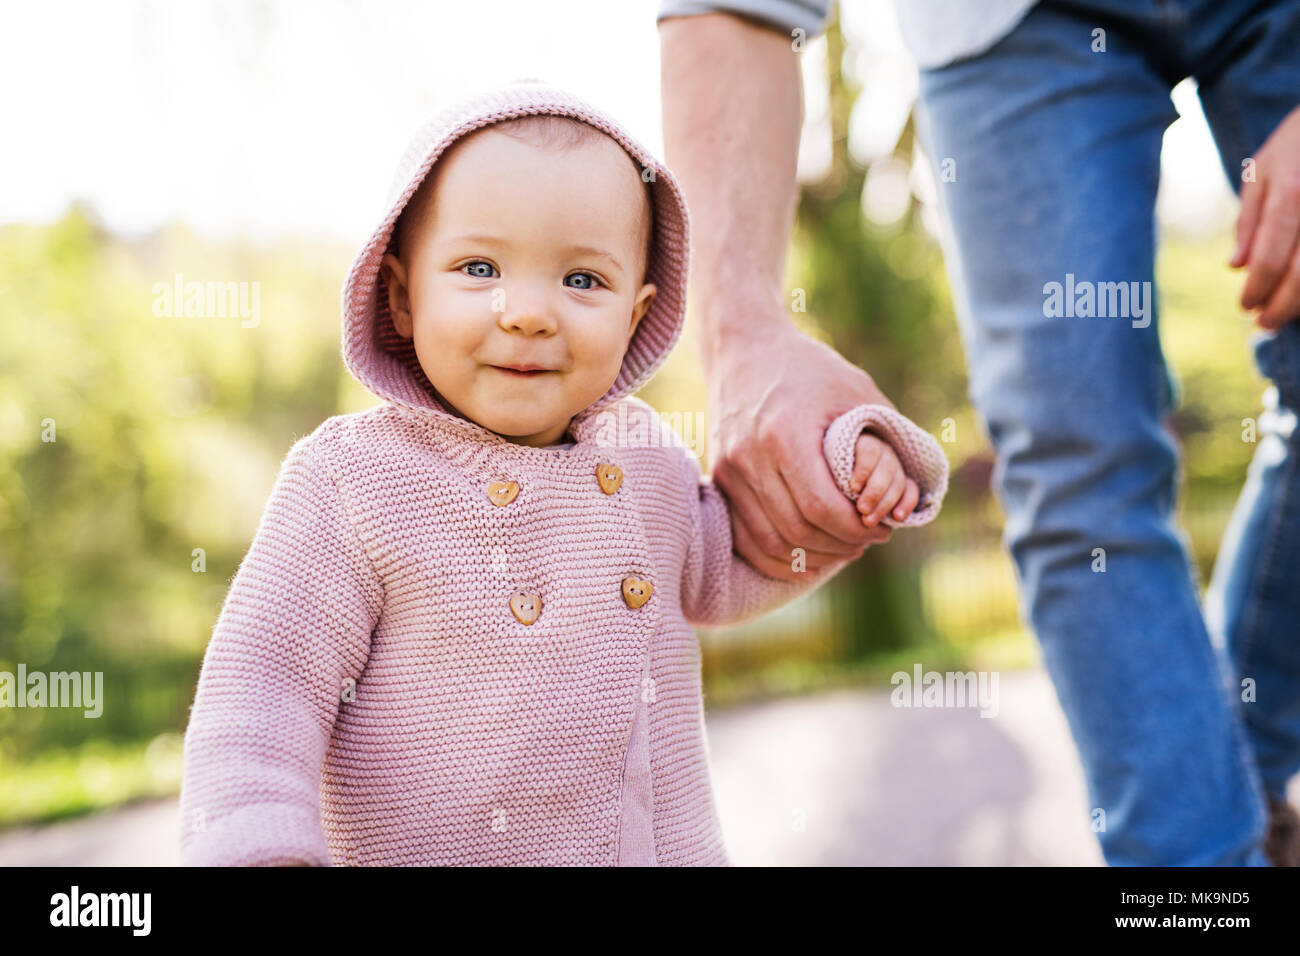 A father with his toddler daughter outside in spring nature. Stock Photo